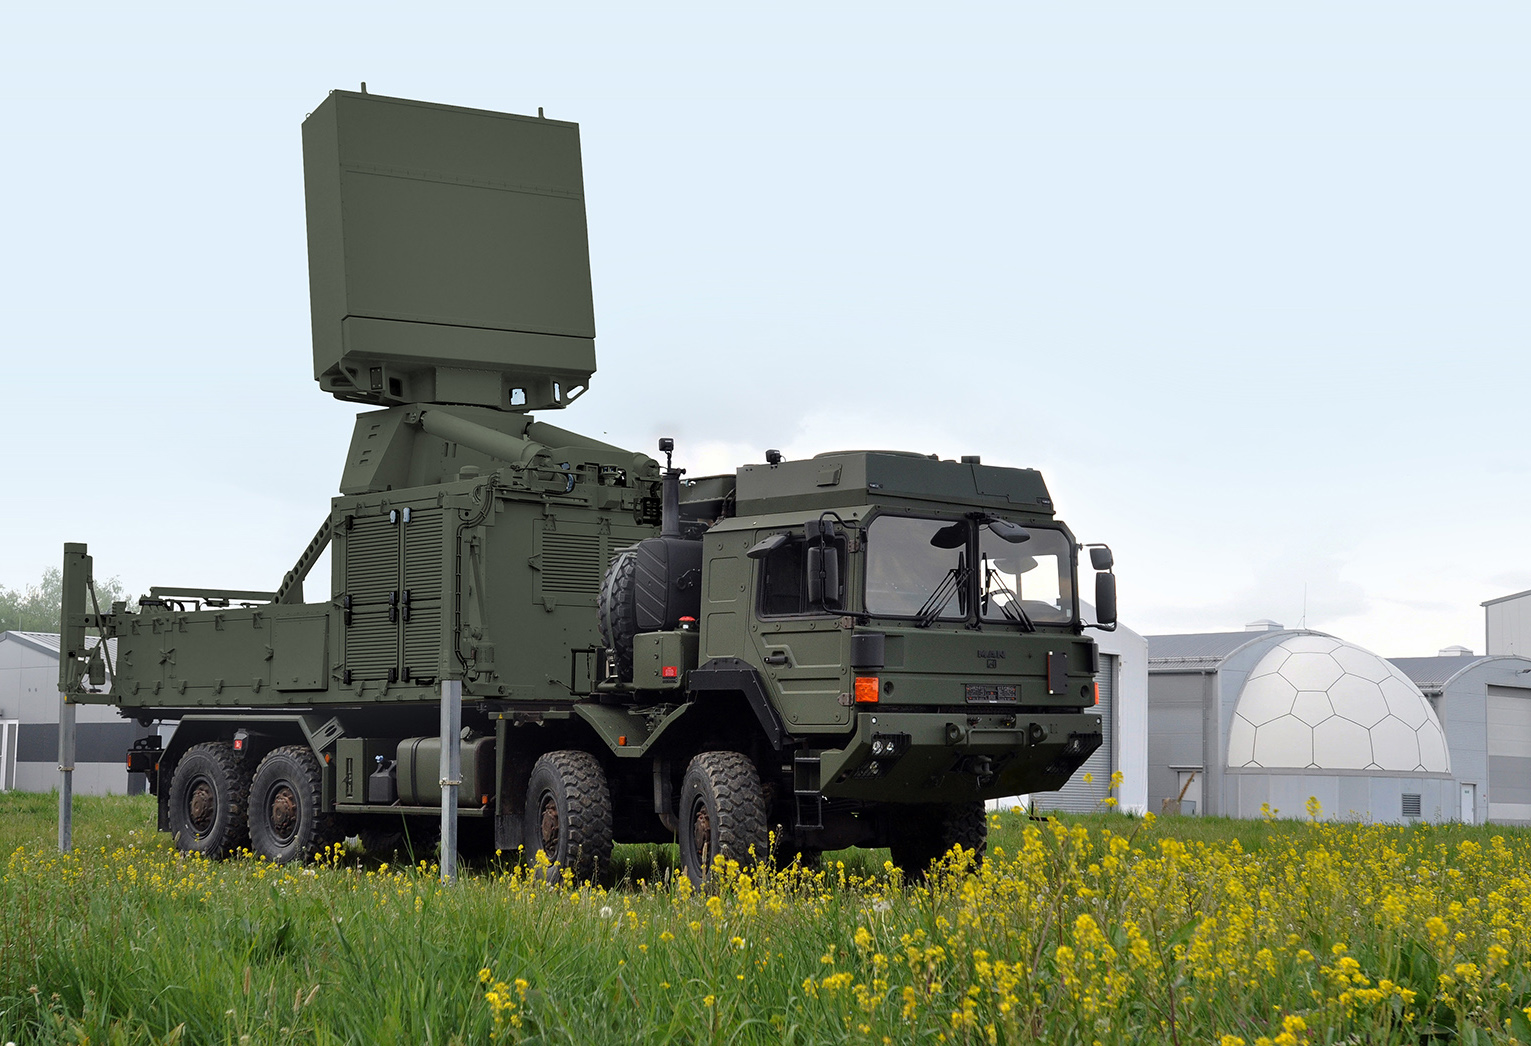 Hensoldt will transfer additional TRML-4D radars to Ukraine, they can track ballistic missiles and escort up to 1,500 targets simultaneously